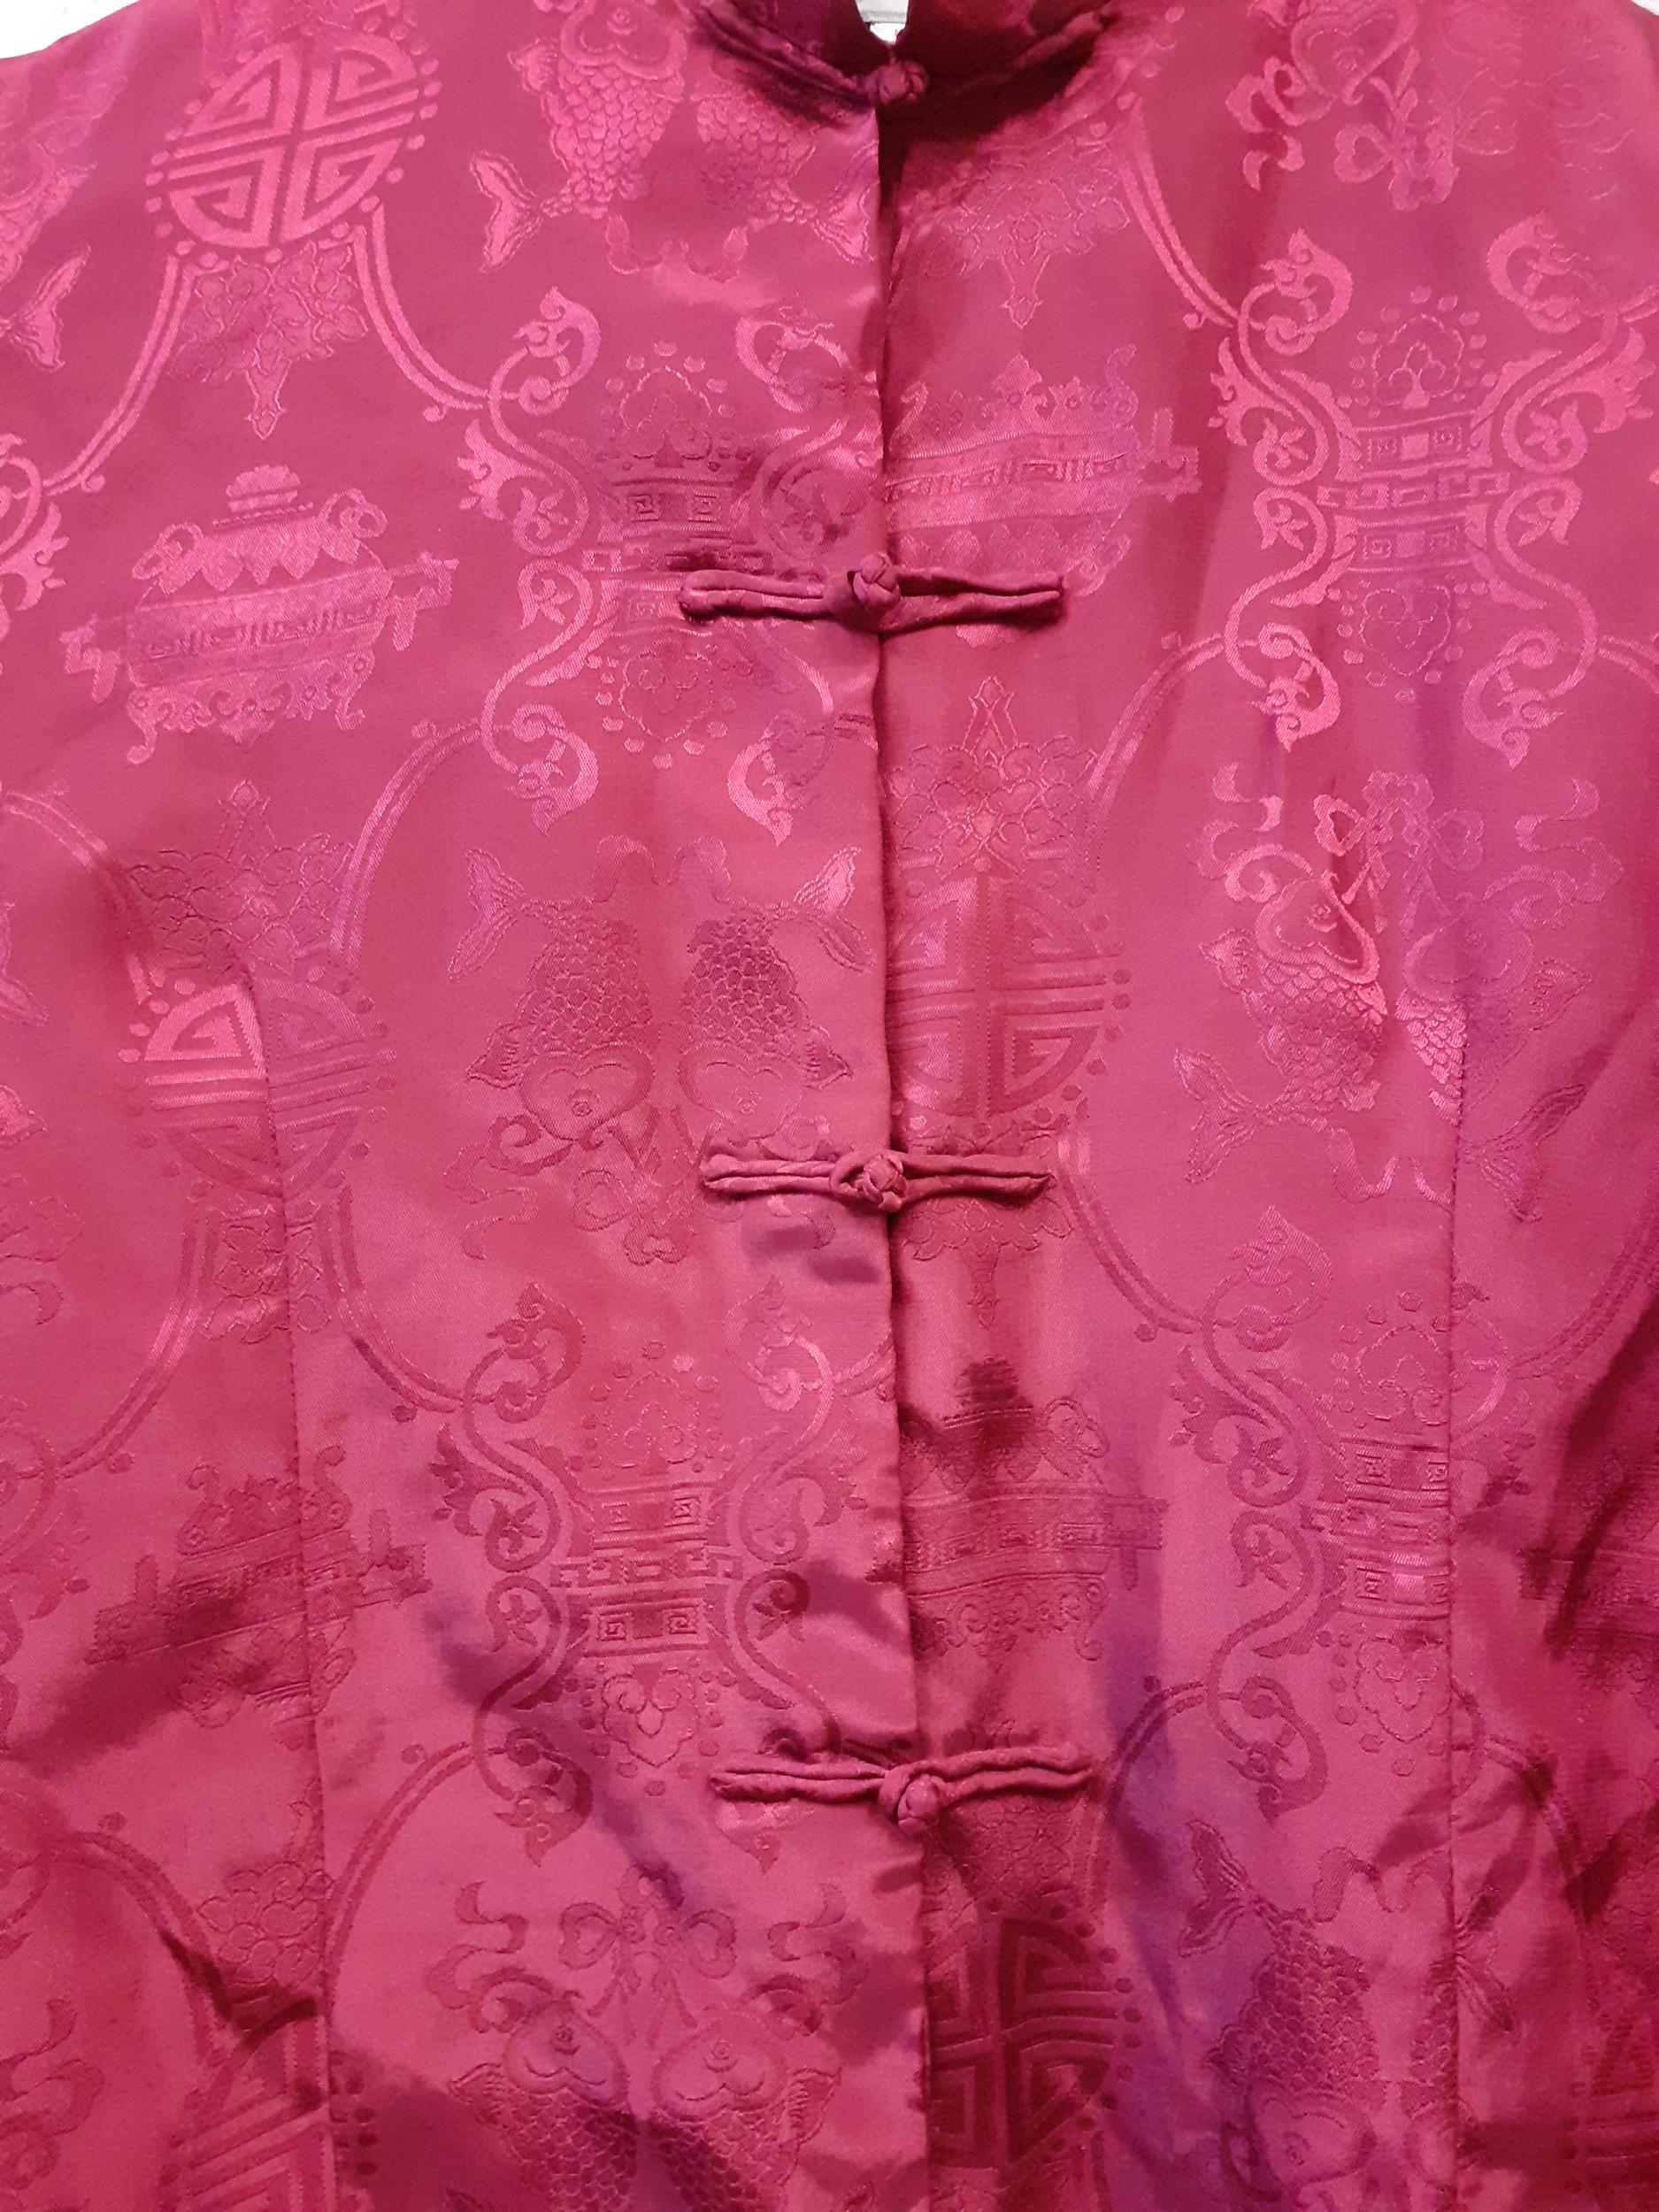 A 20th Century Japanese robe in black silk having hand-embroidered pink flowers and green tubular - Image 7 of 8